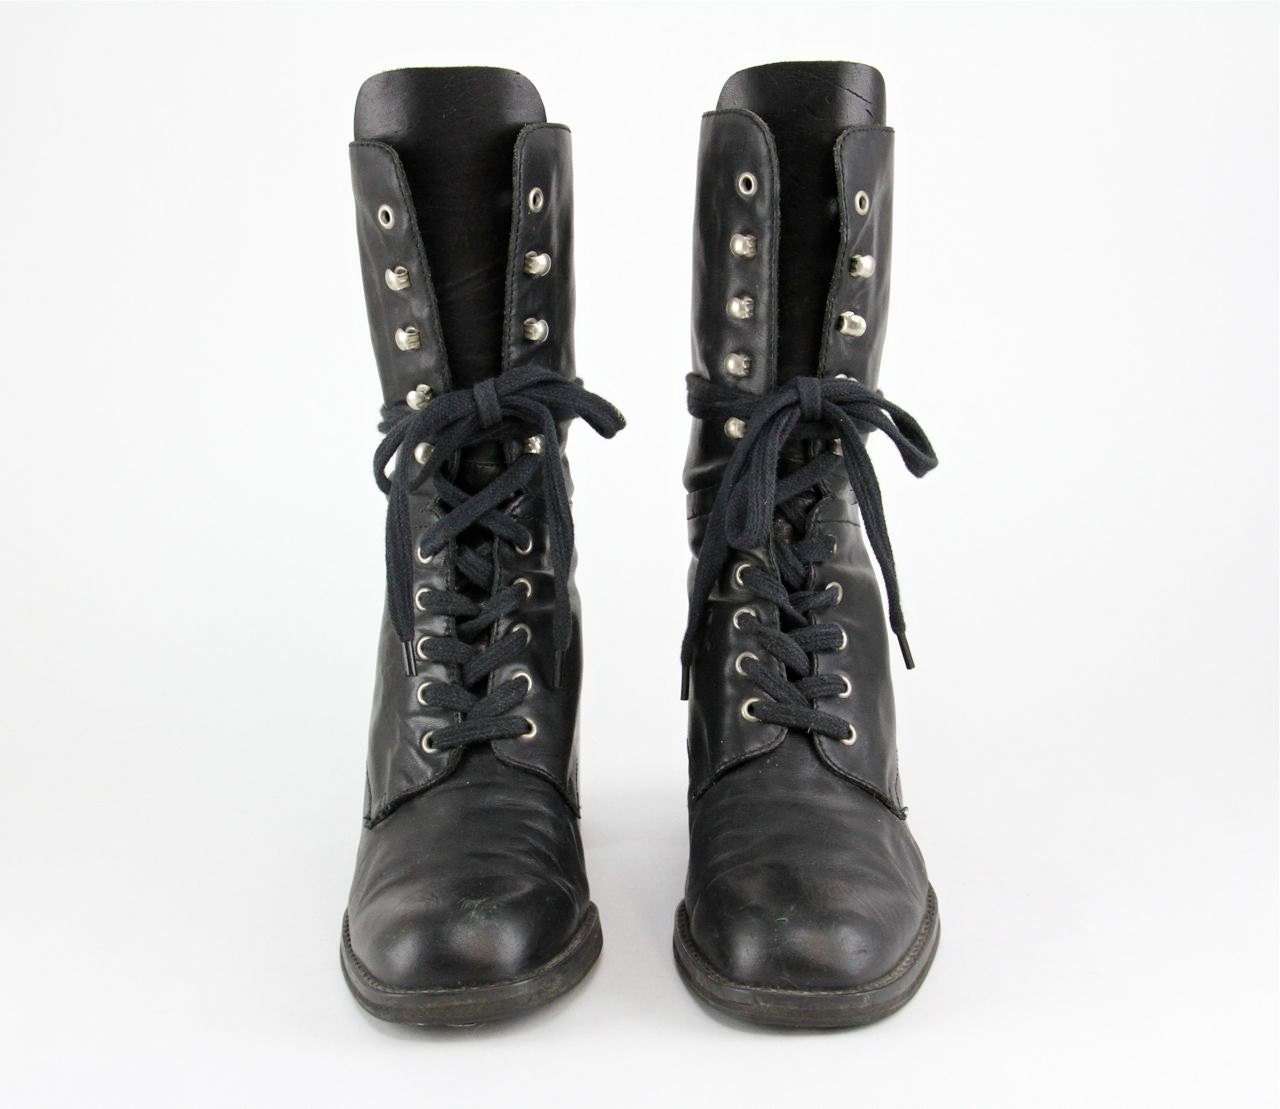 Boots Goth